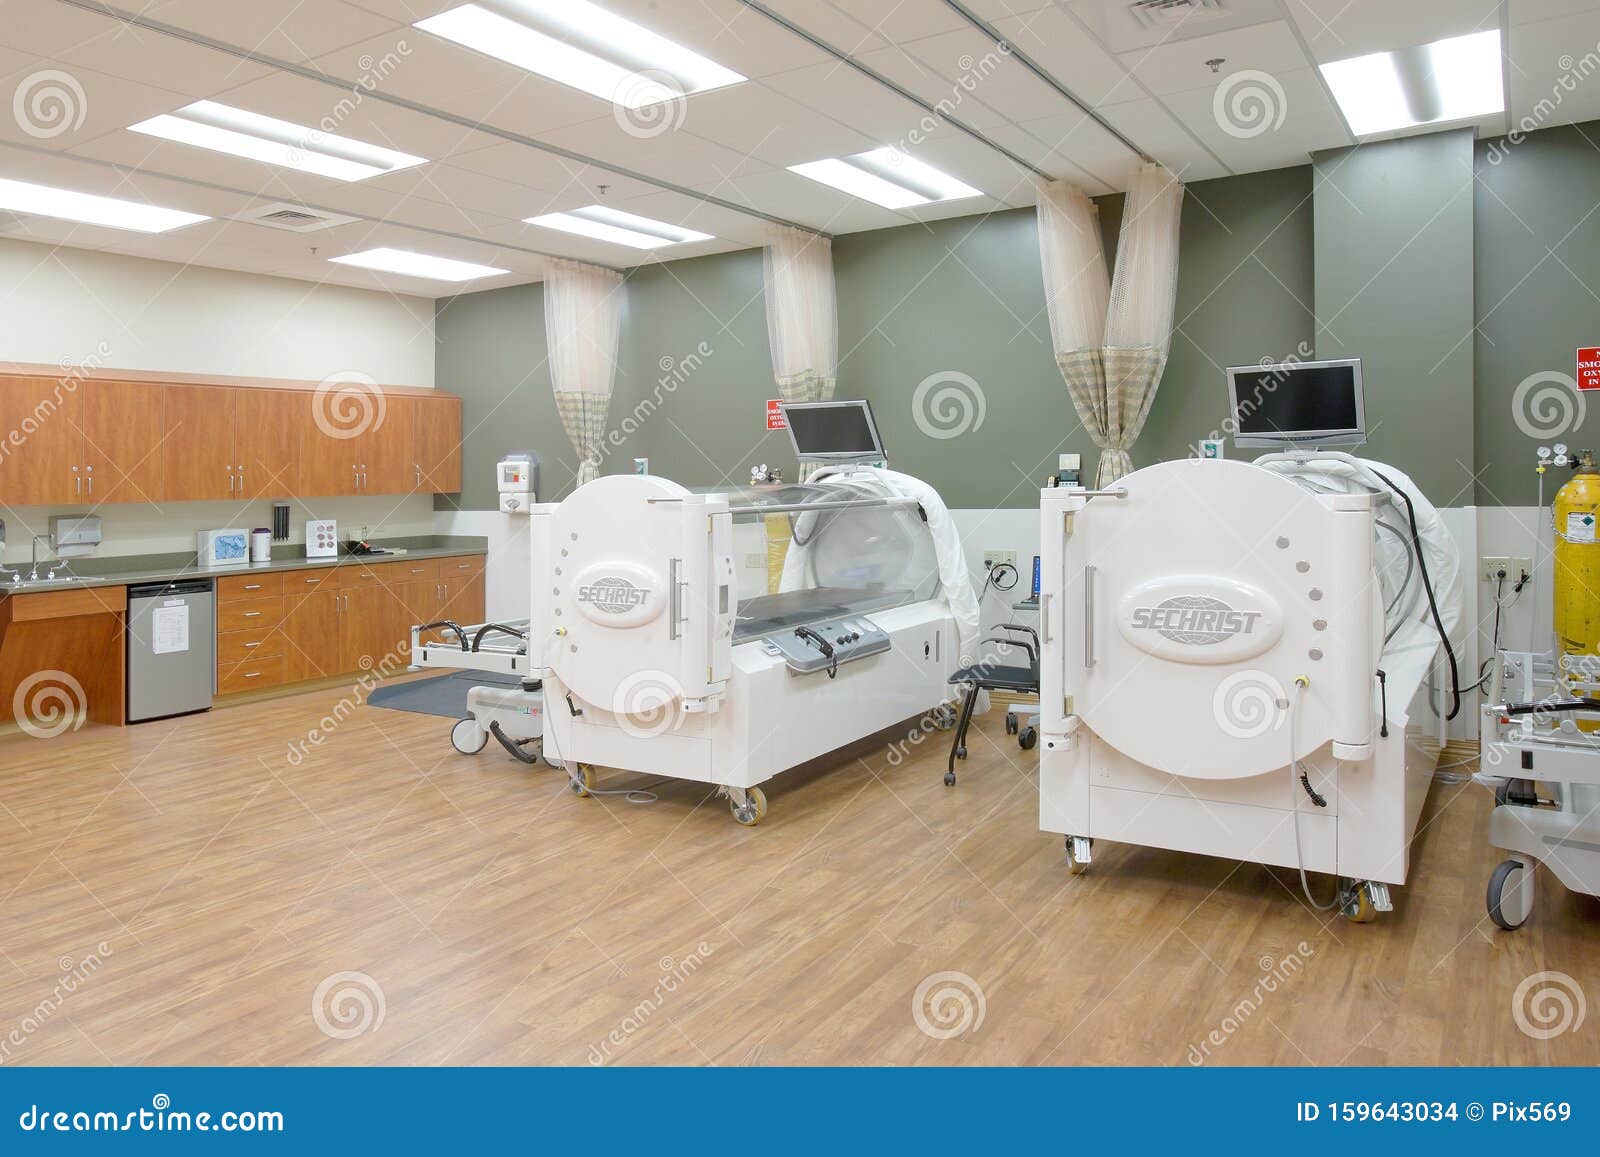 hyperbaric chambers used in wound treatment in a medical clinic